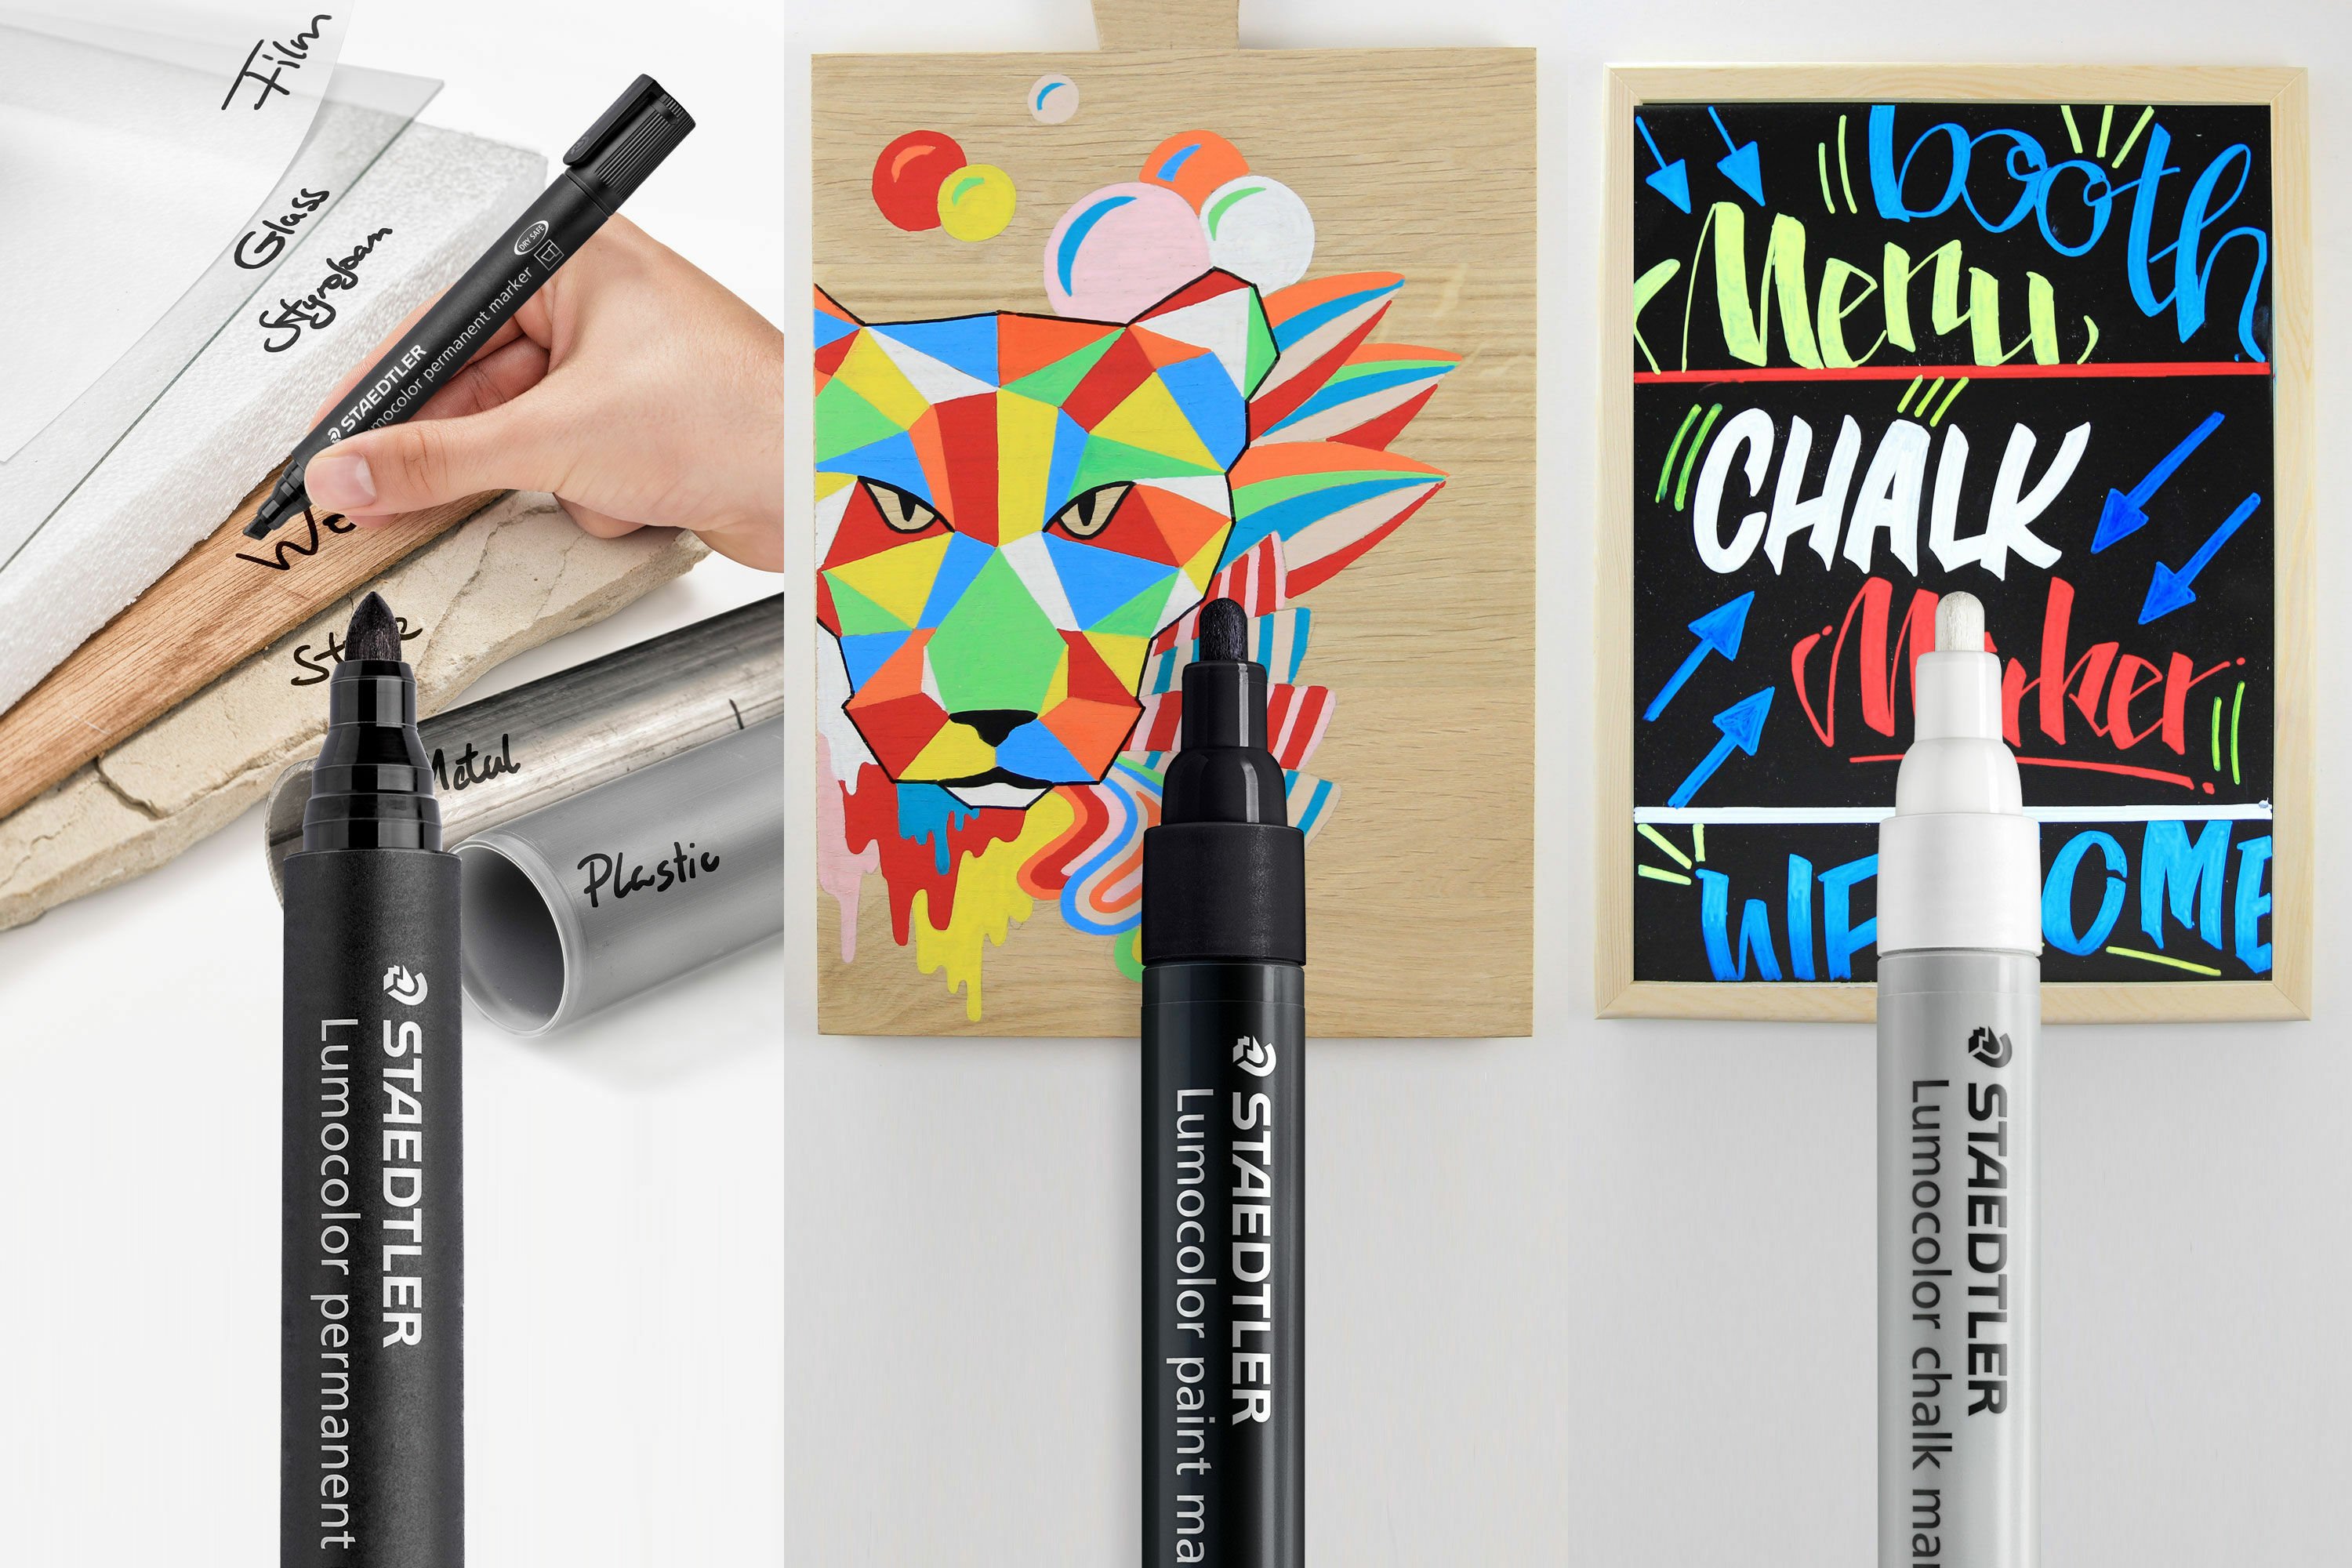 Lumocolor chalk, paint & permanent markers by STAEDTLER for